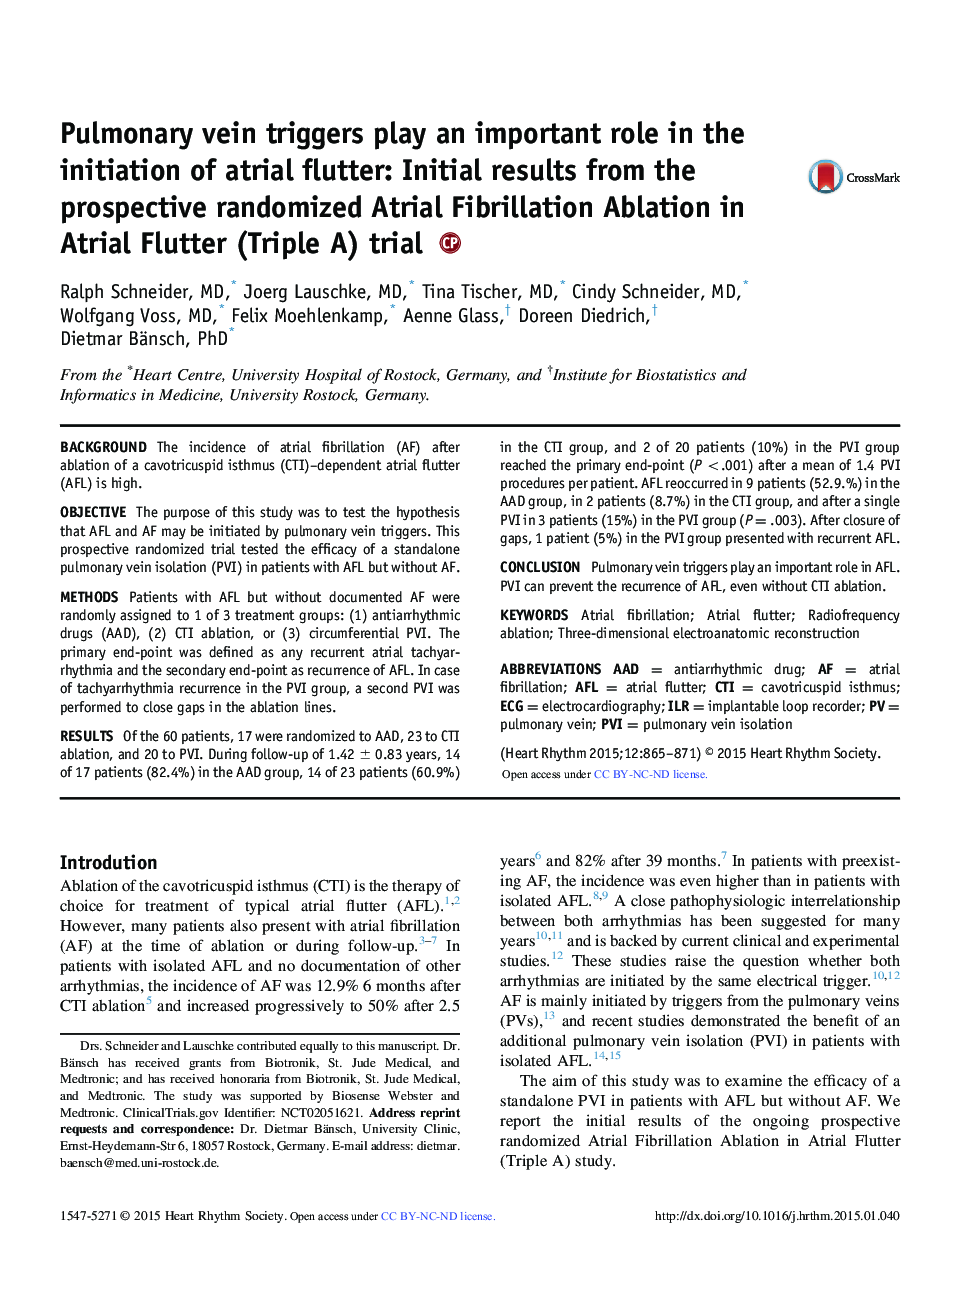 Pulmonary vein triggers play an important role in the initiation of atrial flutter: Initial results from the prospective randomized Atrial Fibrillation Ablation in Atrial Flutter (Triple A) trial